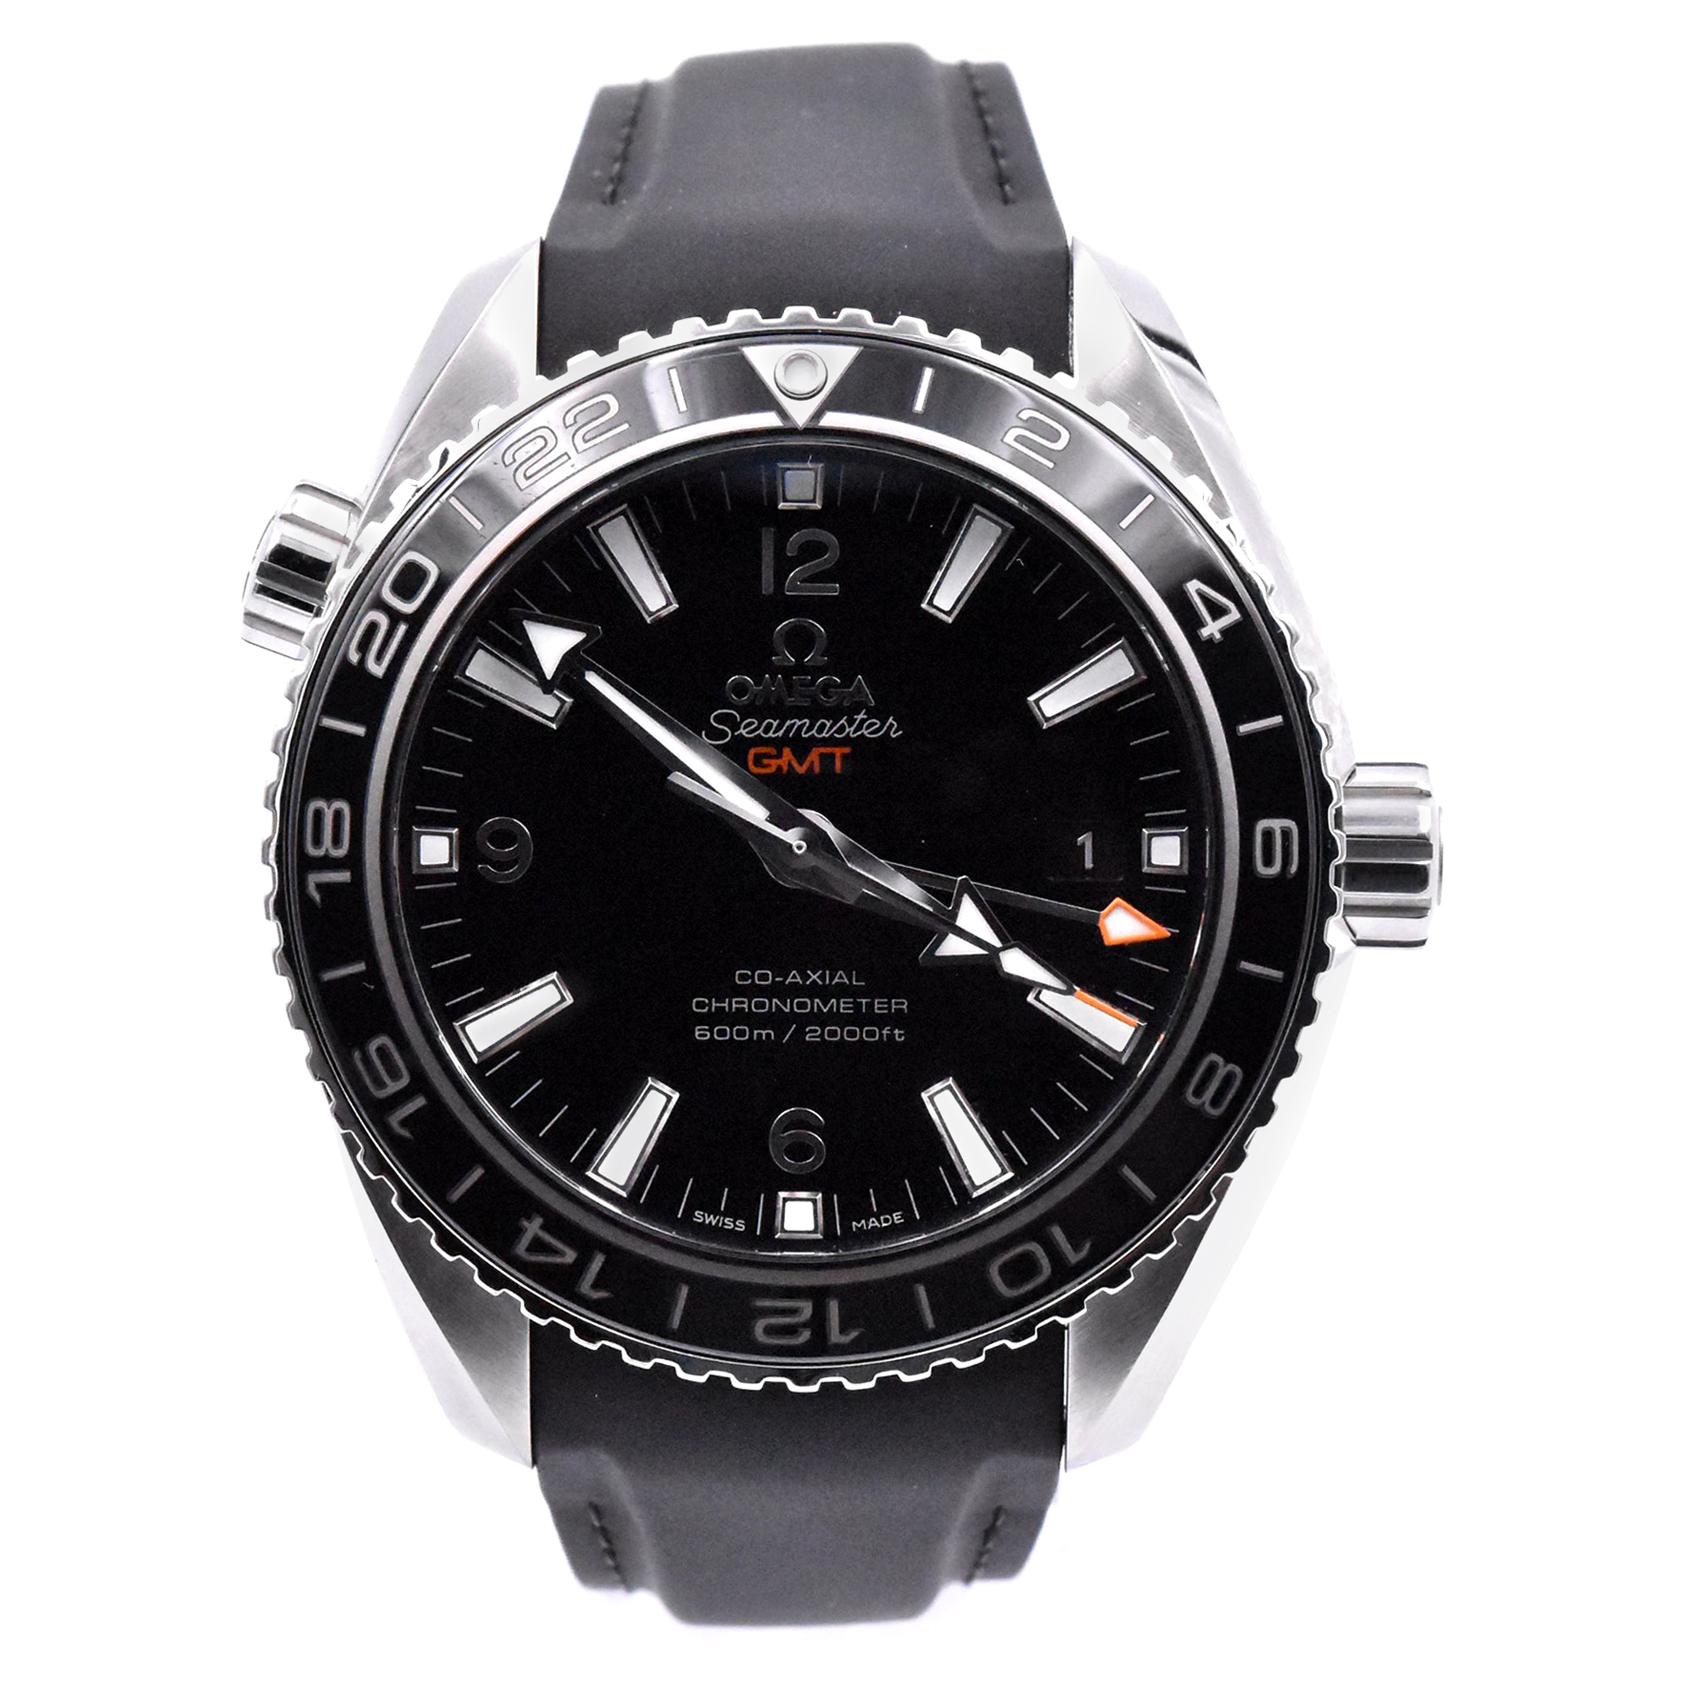 Omega Seamaster Planet Ocean GMT Watch Ref. 232.32.44.22.01.001 at 1stDibs